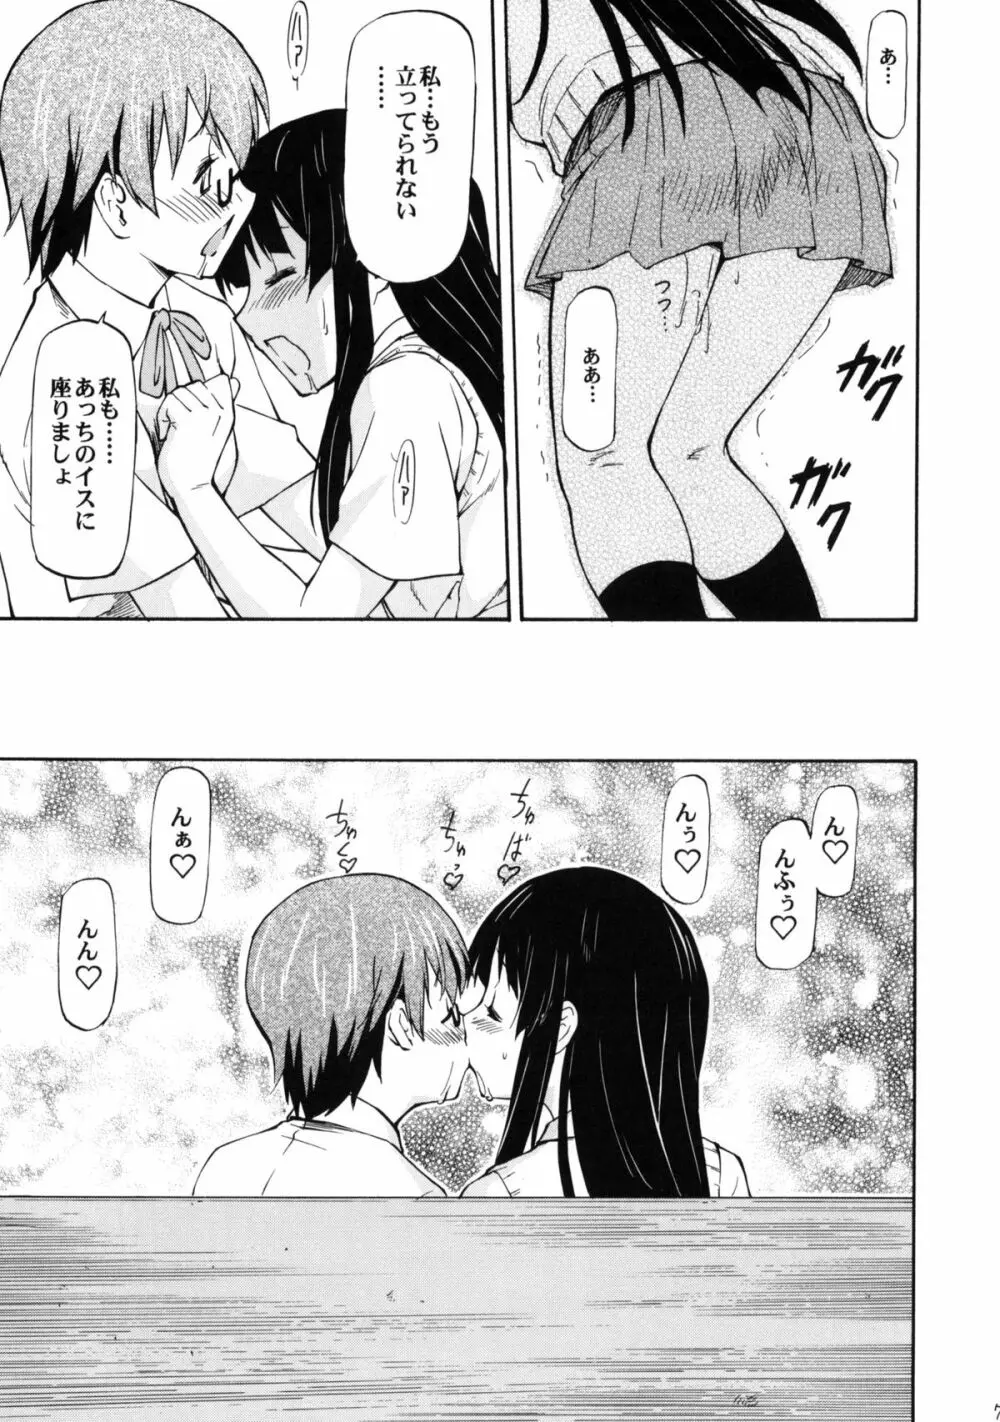 LeLeぱっぱ Vol.16 Re;Re; - page8